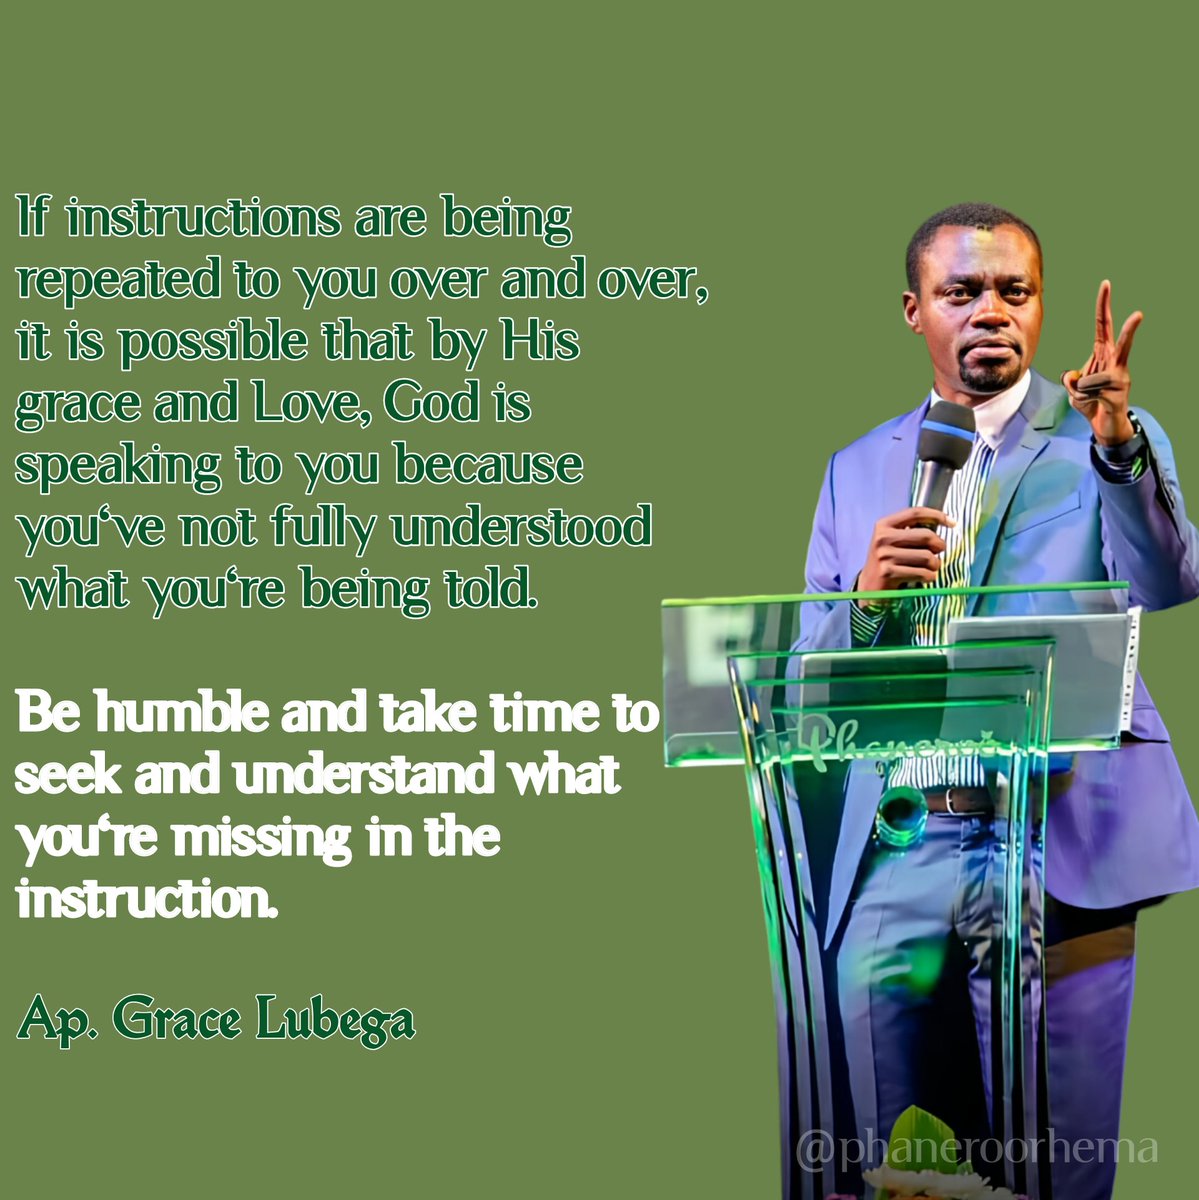 If instructions are being repeated to you over and over, it is possible that by His grace and Love, God is speaking to you because you've not fully understood what you're being told. Ap. Grace Lubega #PhanerooRhema #MenGatherVII #PhanerooApp